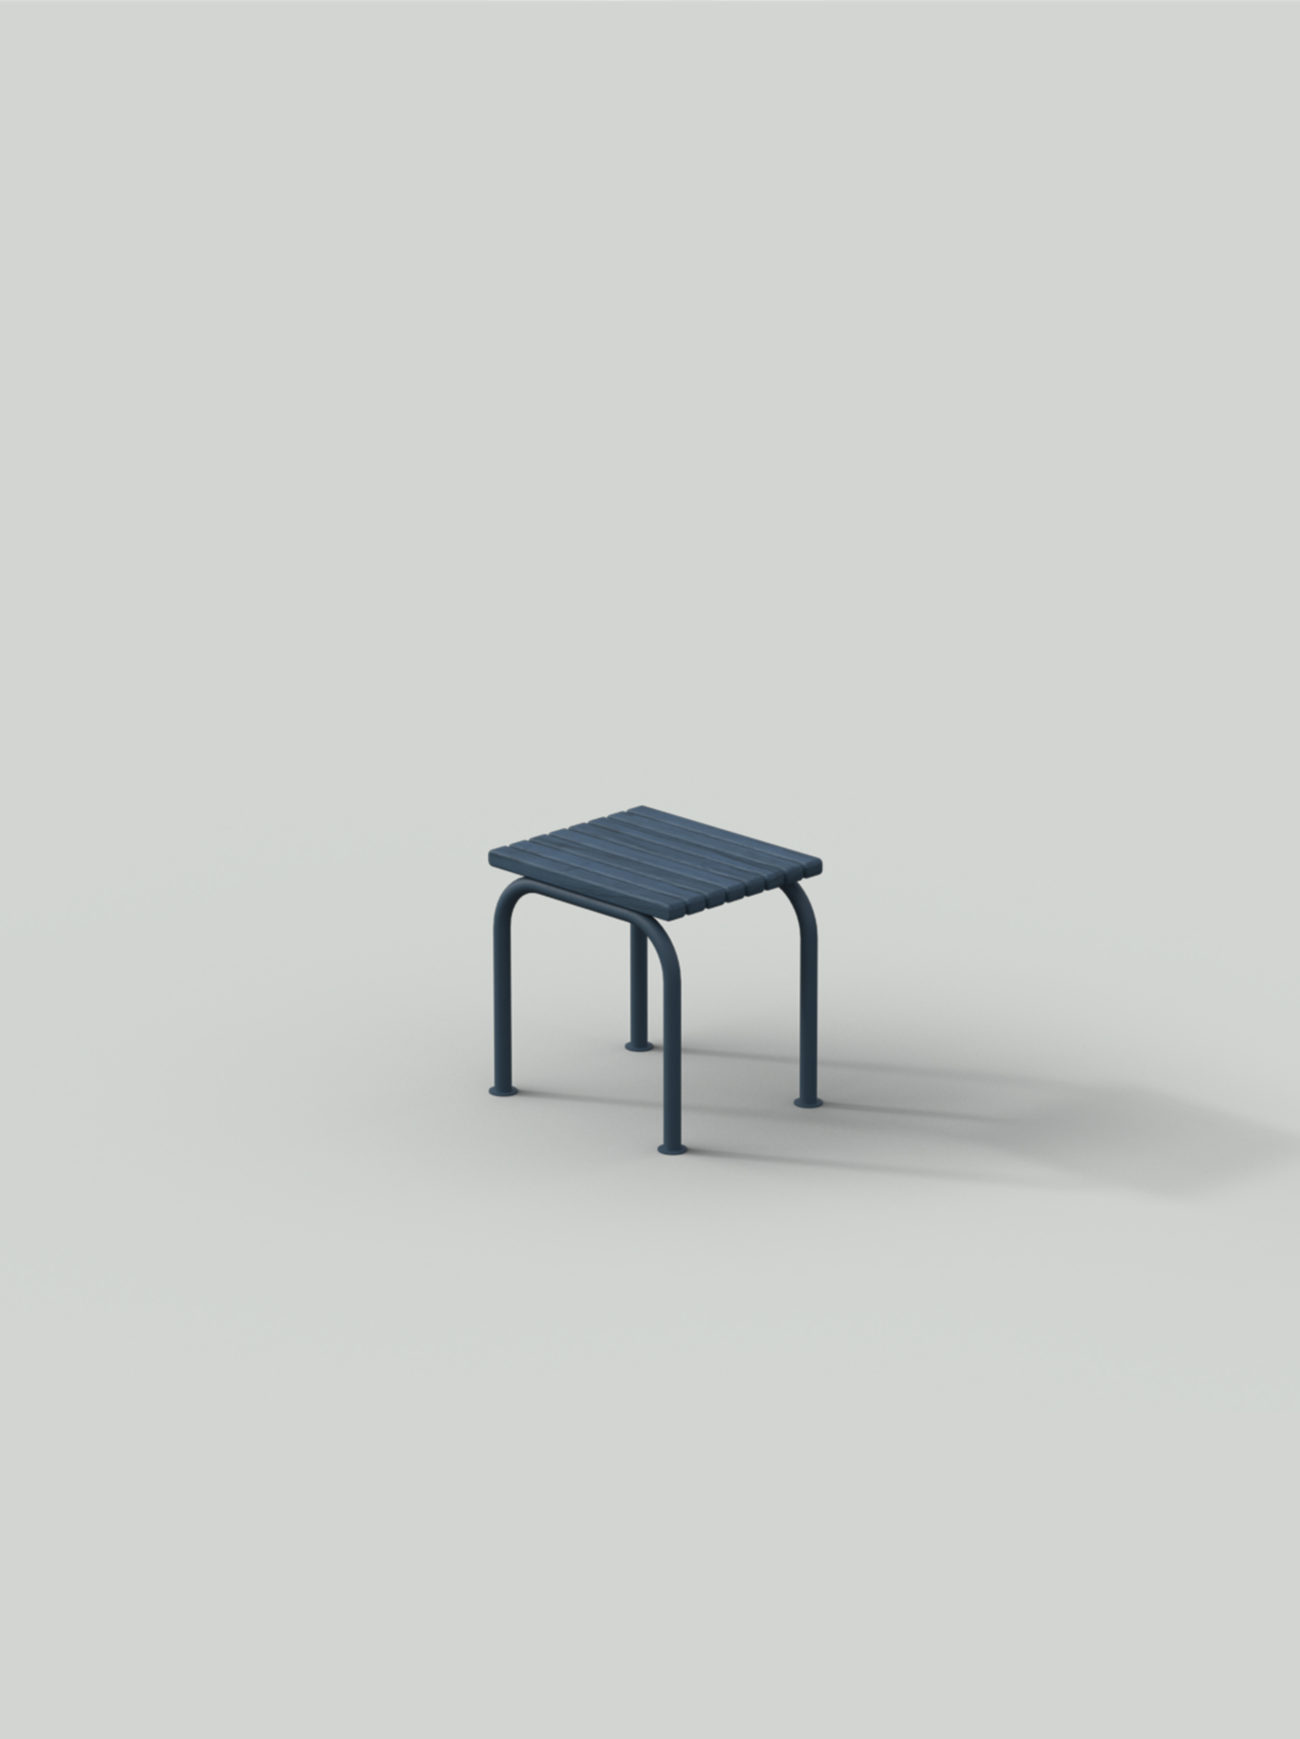 Blue stool with steel frame and wood planks